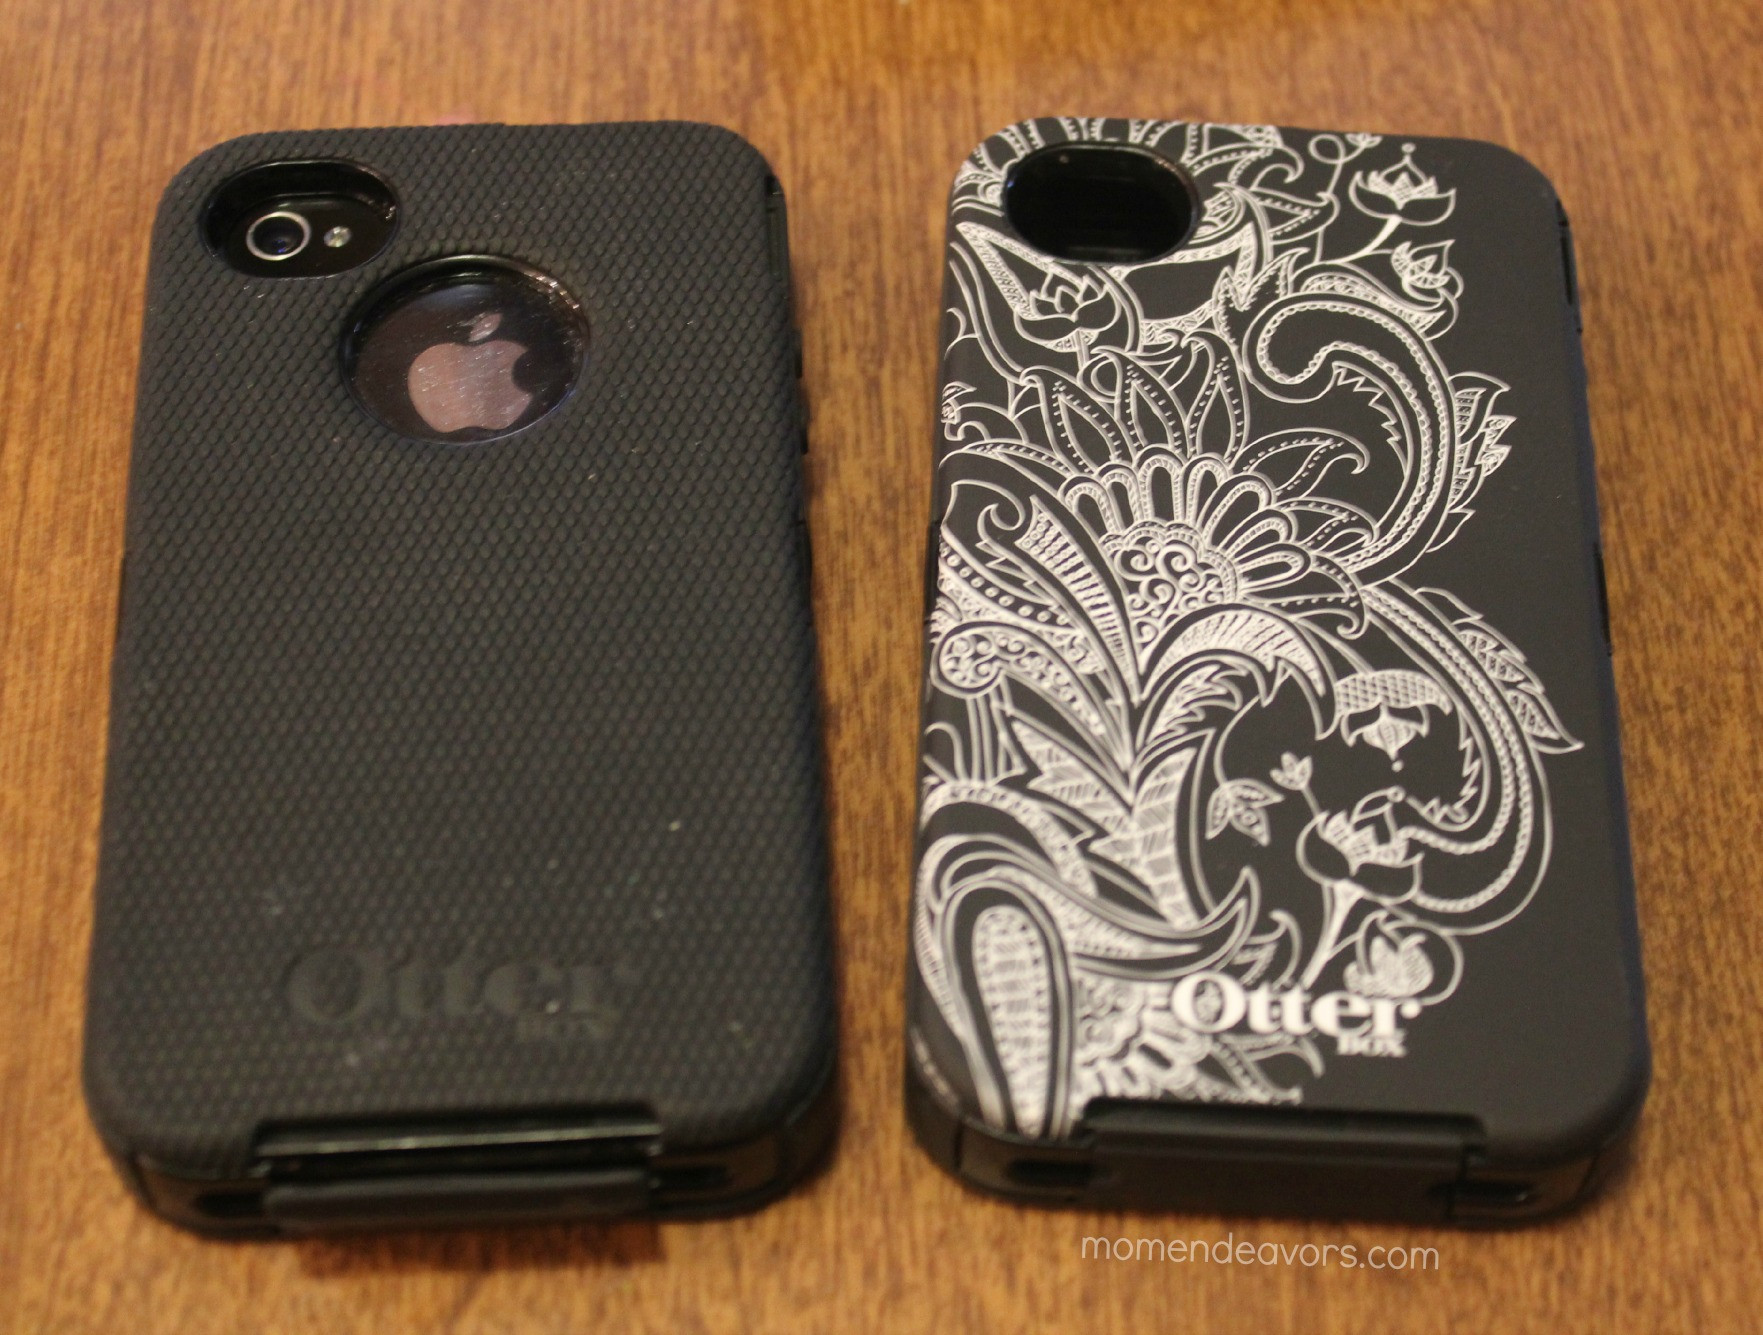 DIY Otterbox Decoration
 Keep Your Phone Kid Safe with OtterBox otterkids